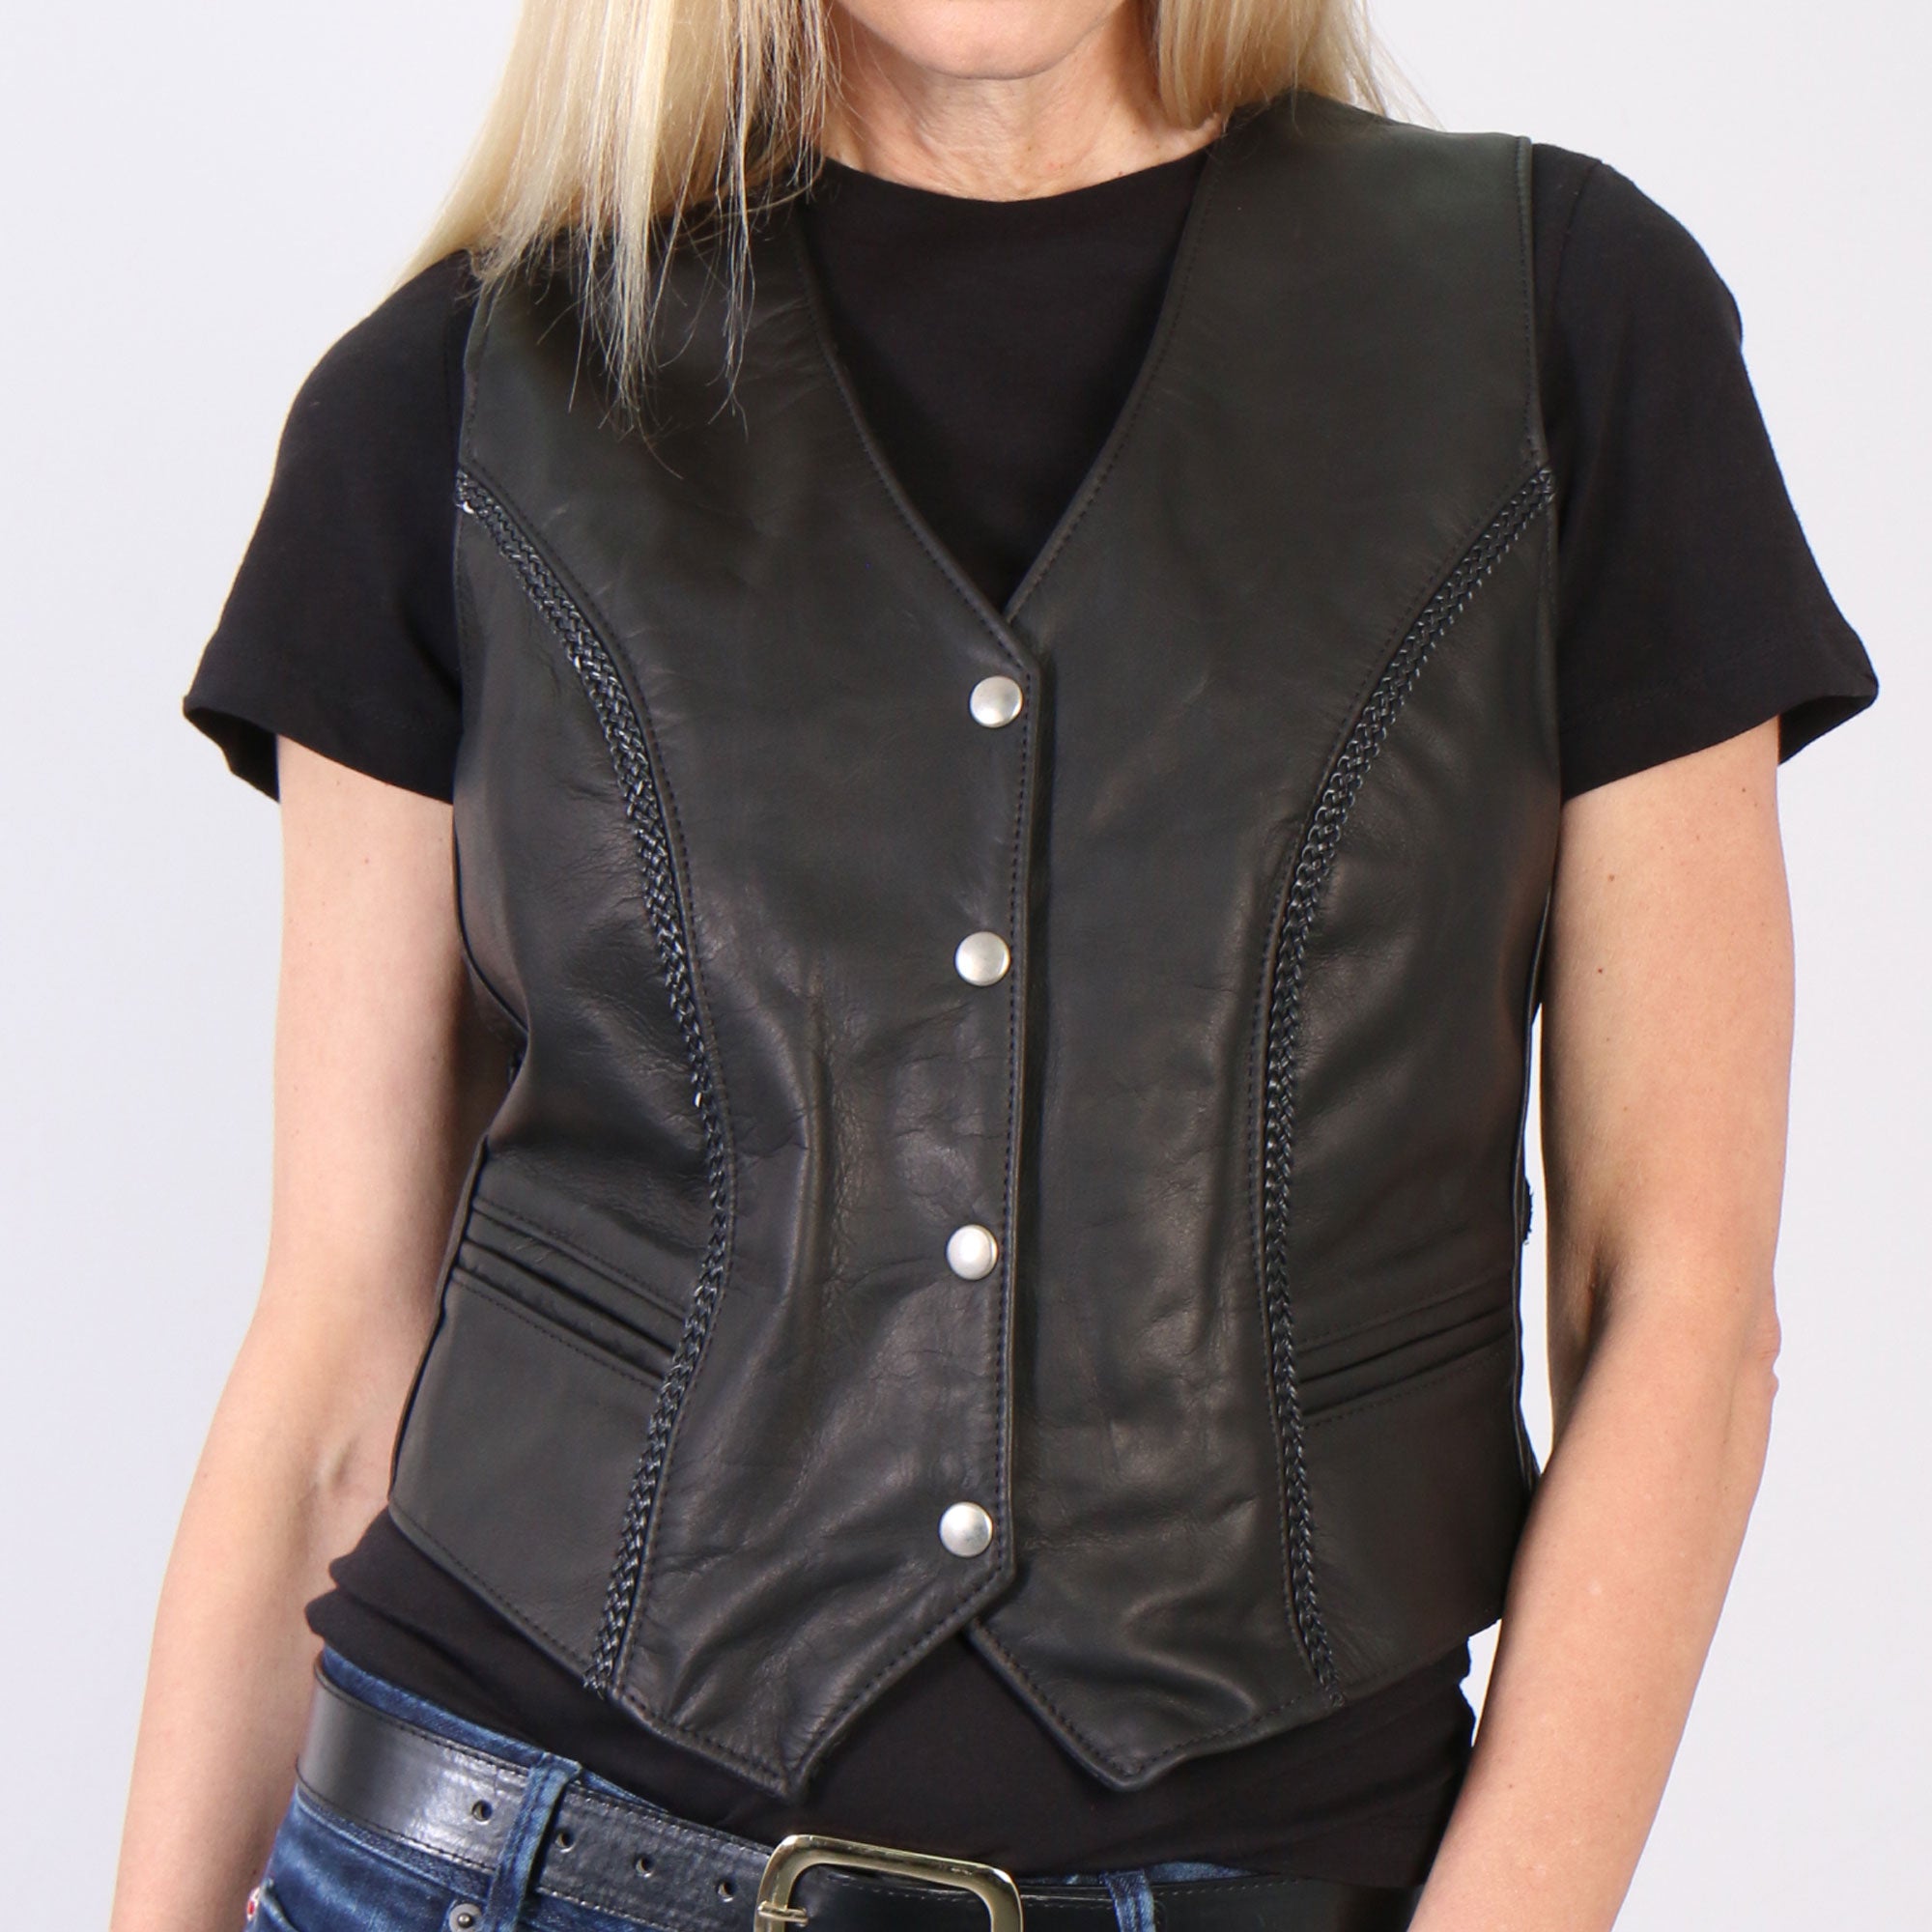 Hot Leathers VSL5001 USA Made Ladies Braided Leather Motorcycle Biker Vest